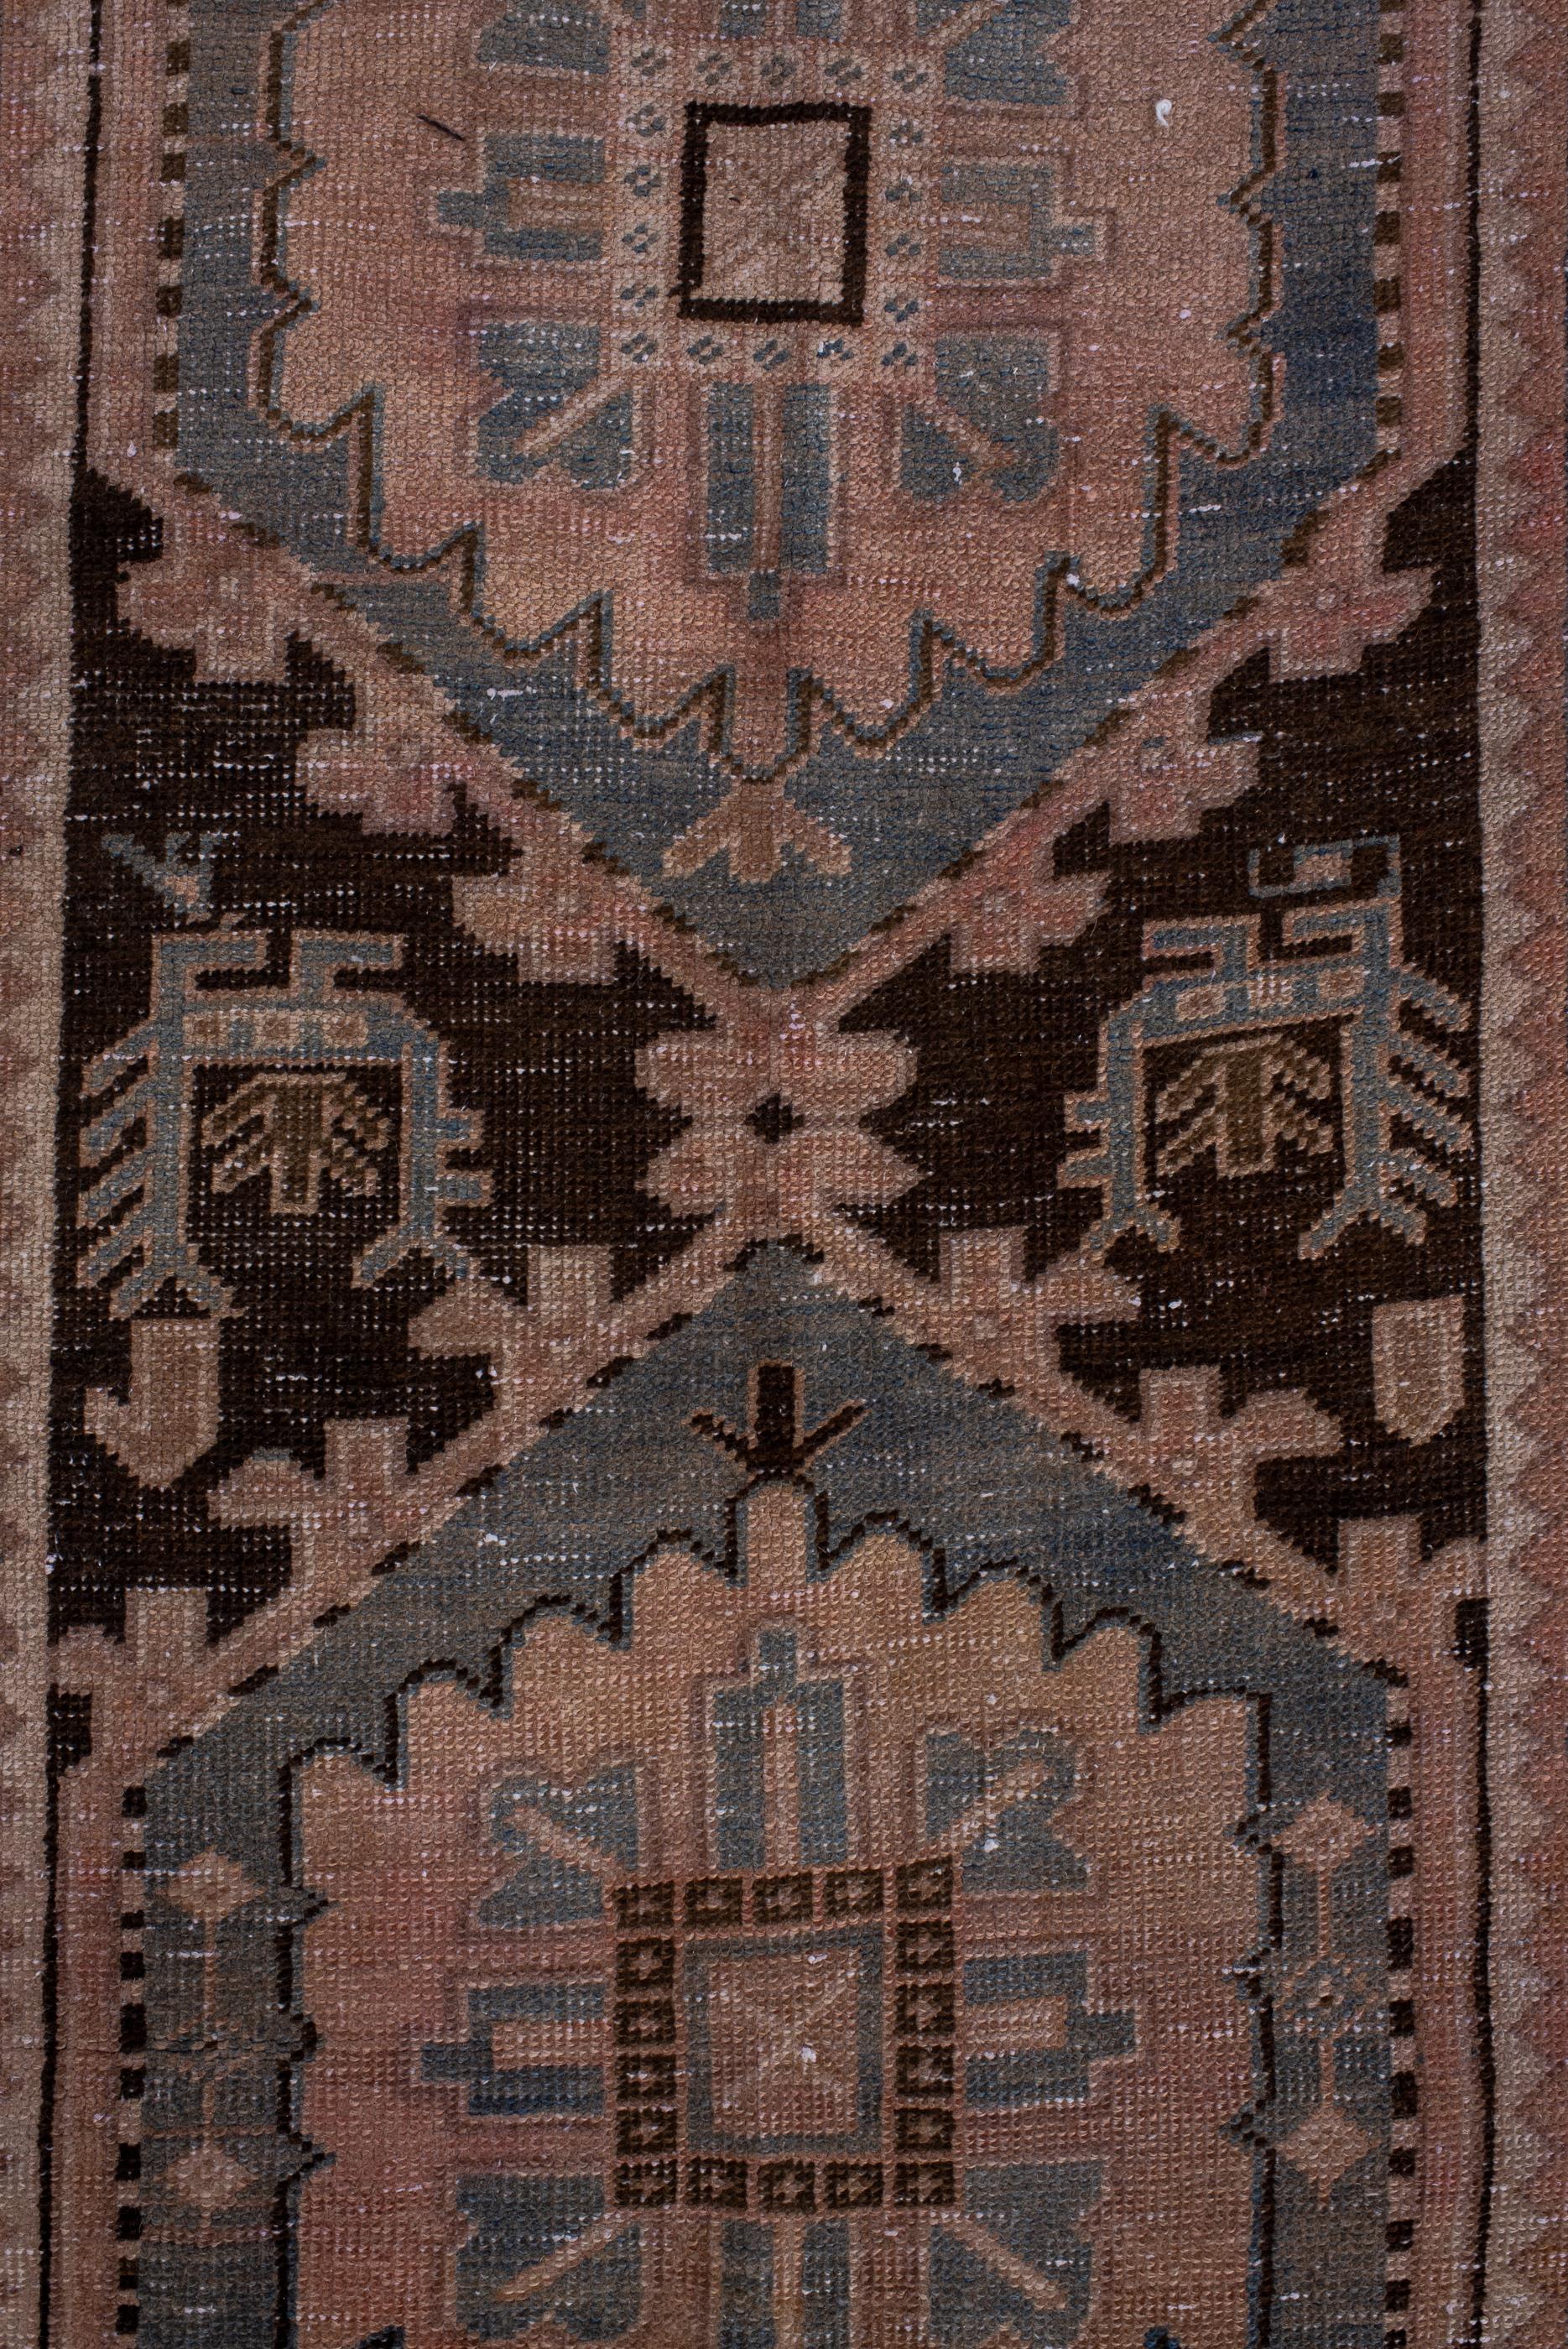 Hand-Knotted Antique Sarab Runner with Dark Field and Floral Designs, Circa 1900's